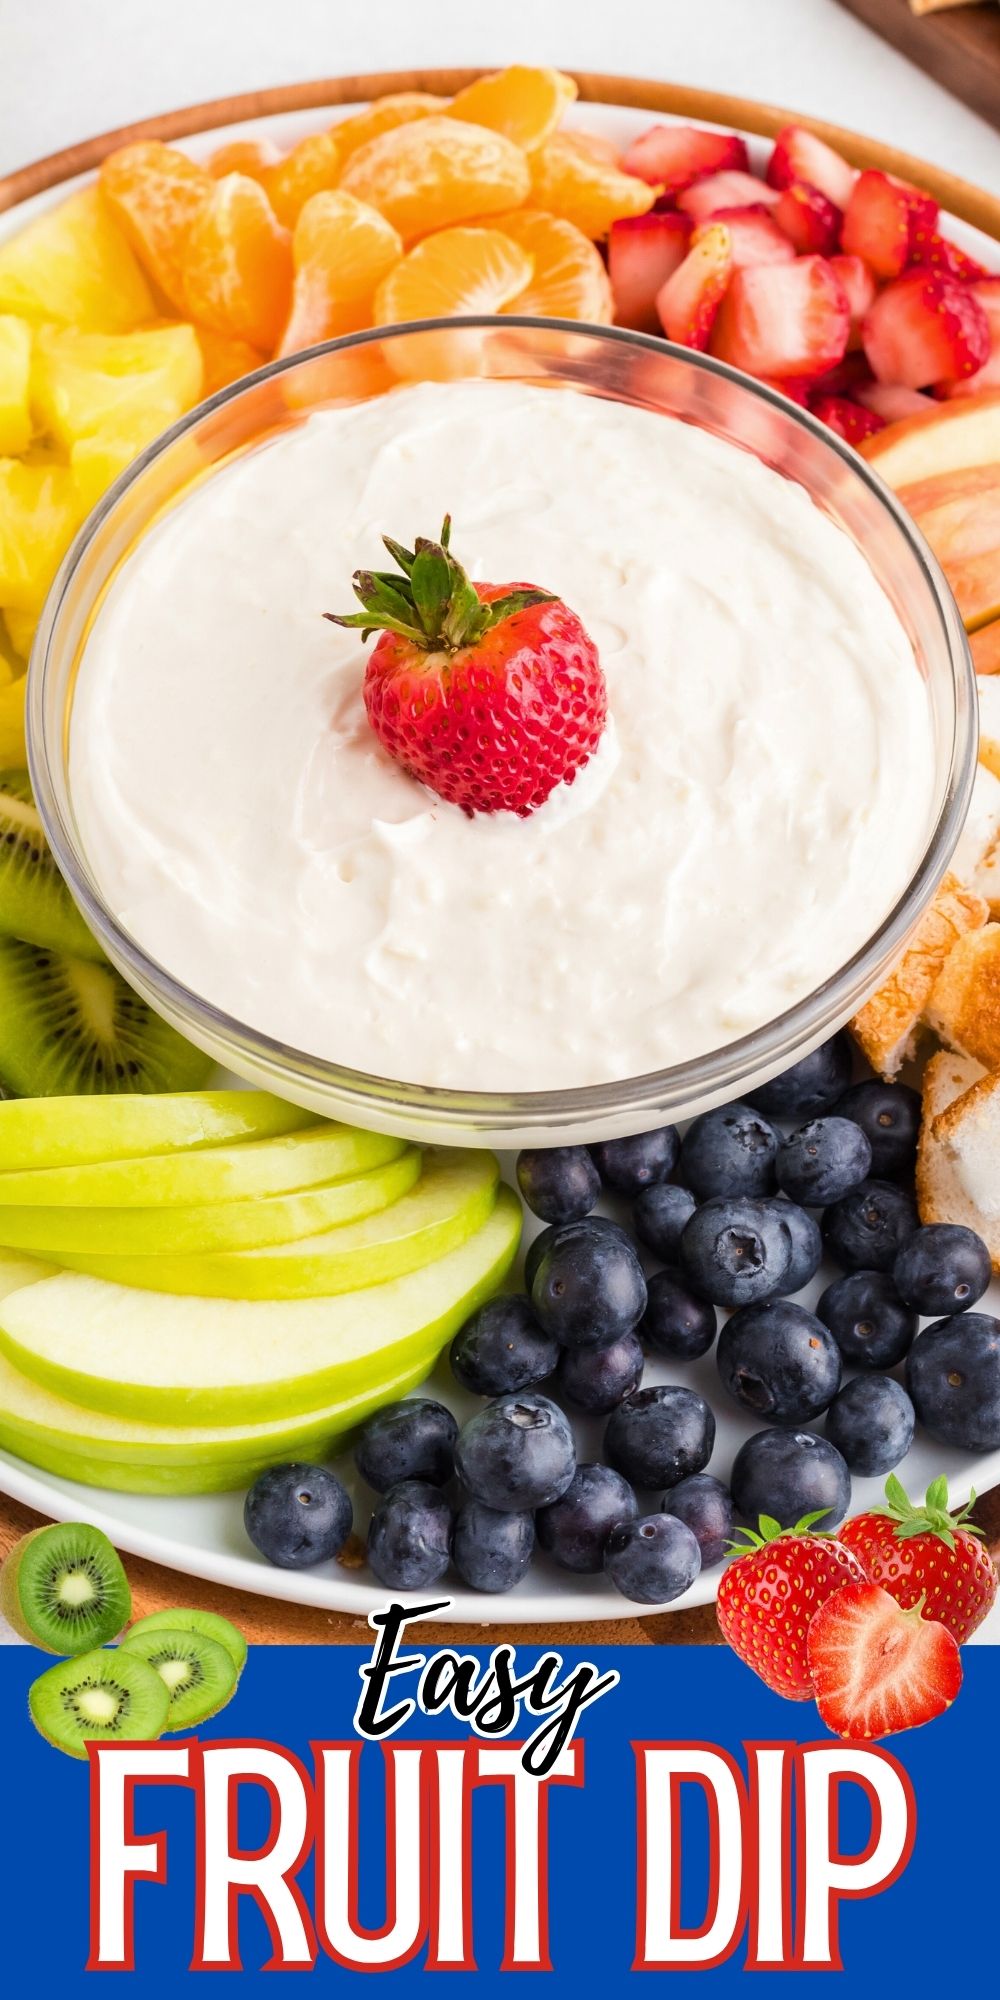 This delicious Fruit Dip is a perfect addition to any fruit platter or dessert tray. Only 3 ingredients are needed to make this creamy dip!